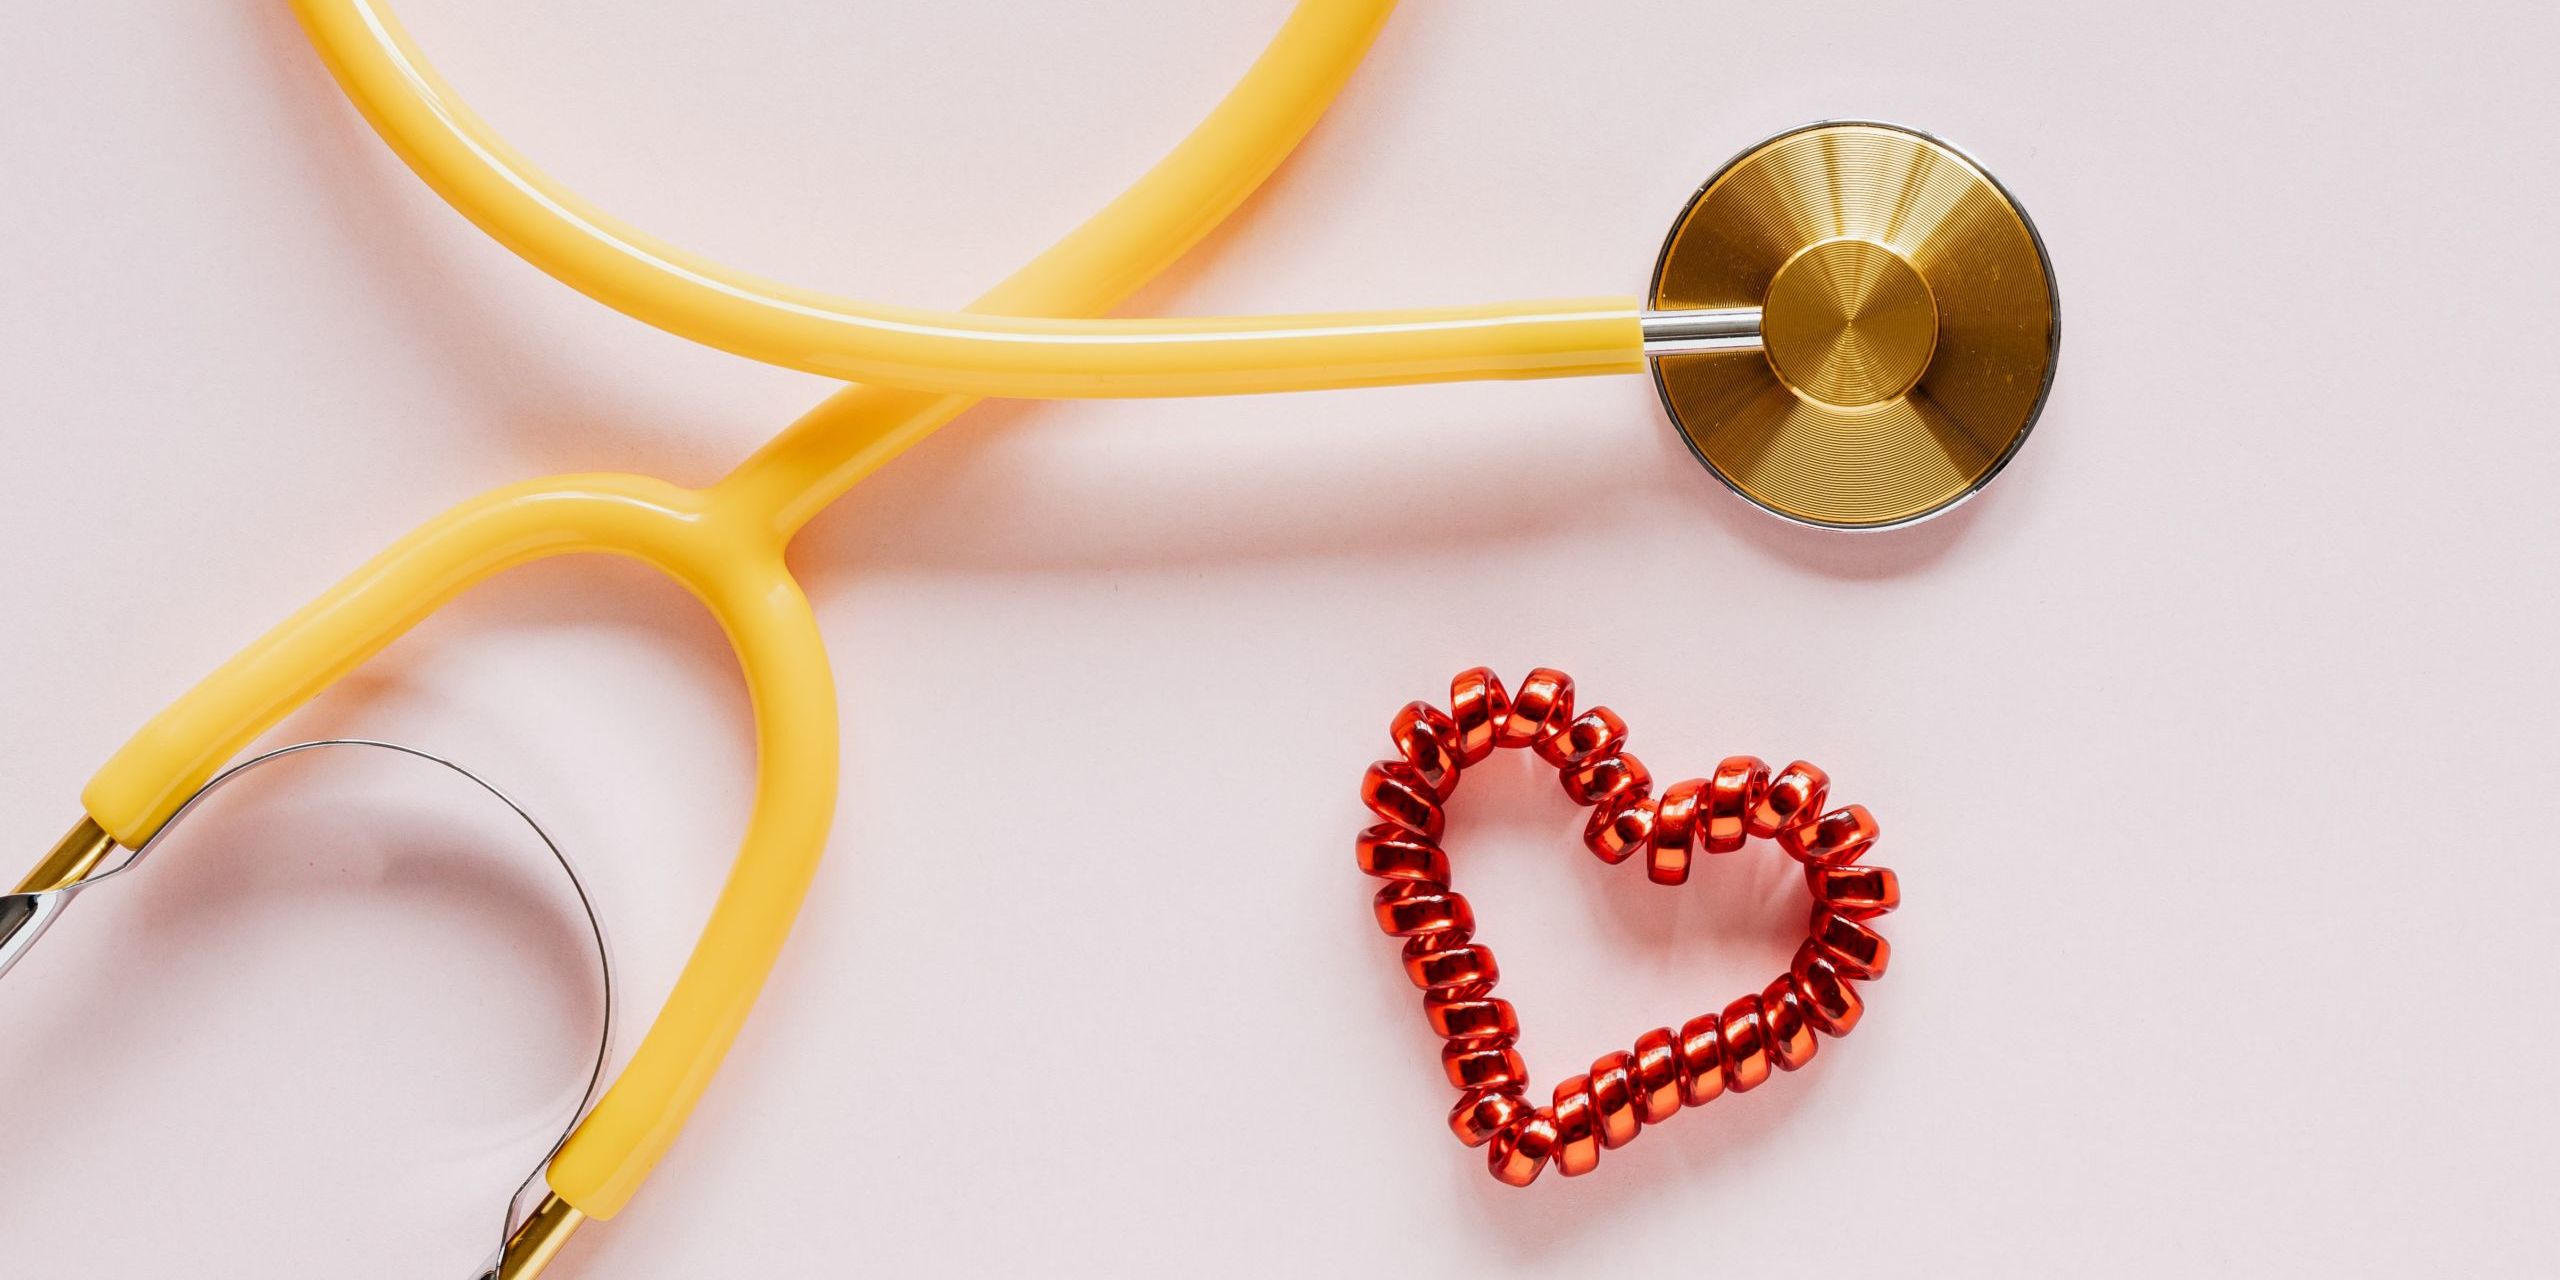 image of stethoscope and heart